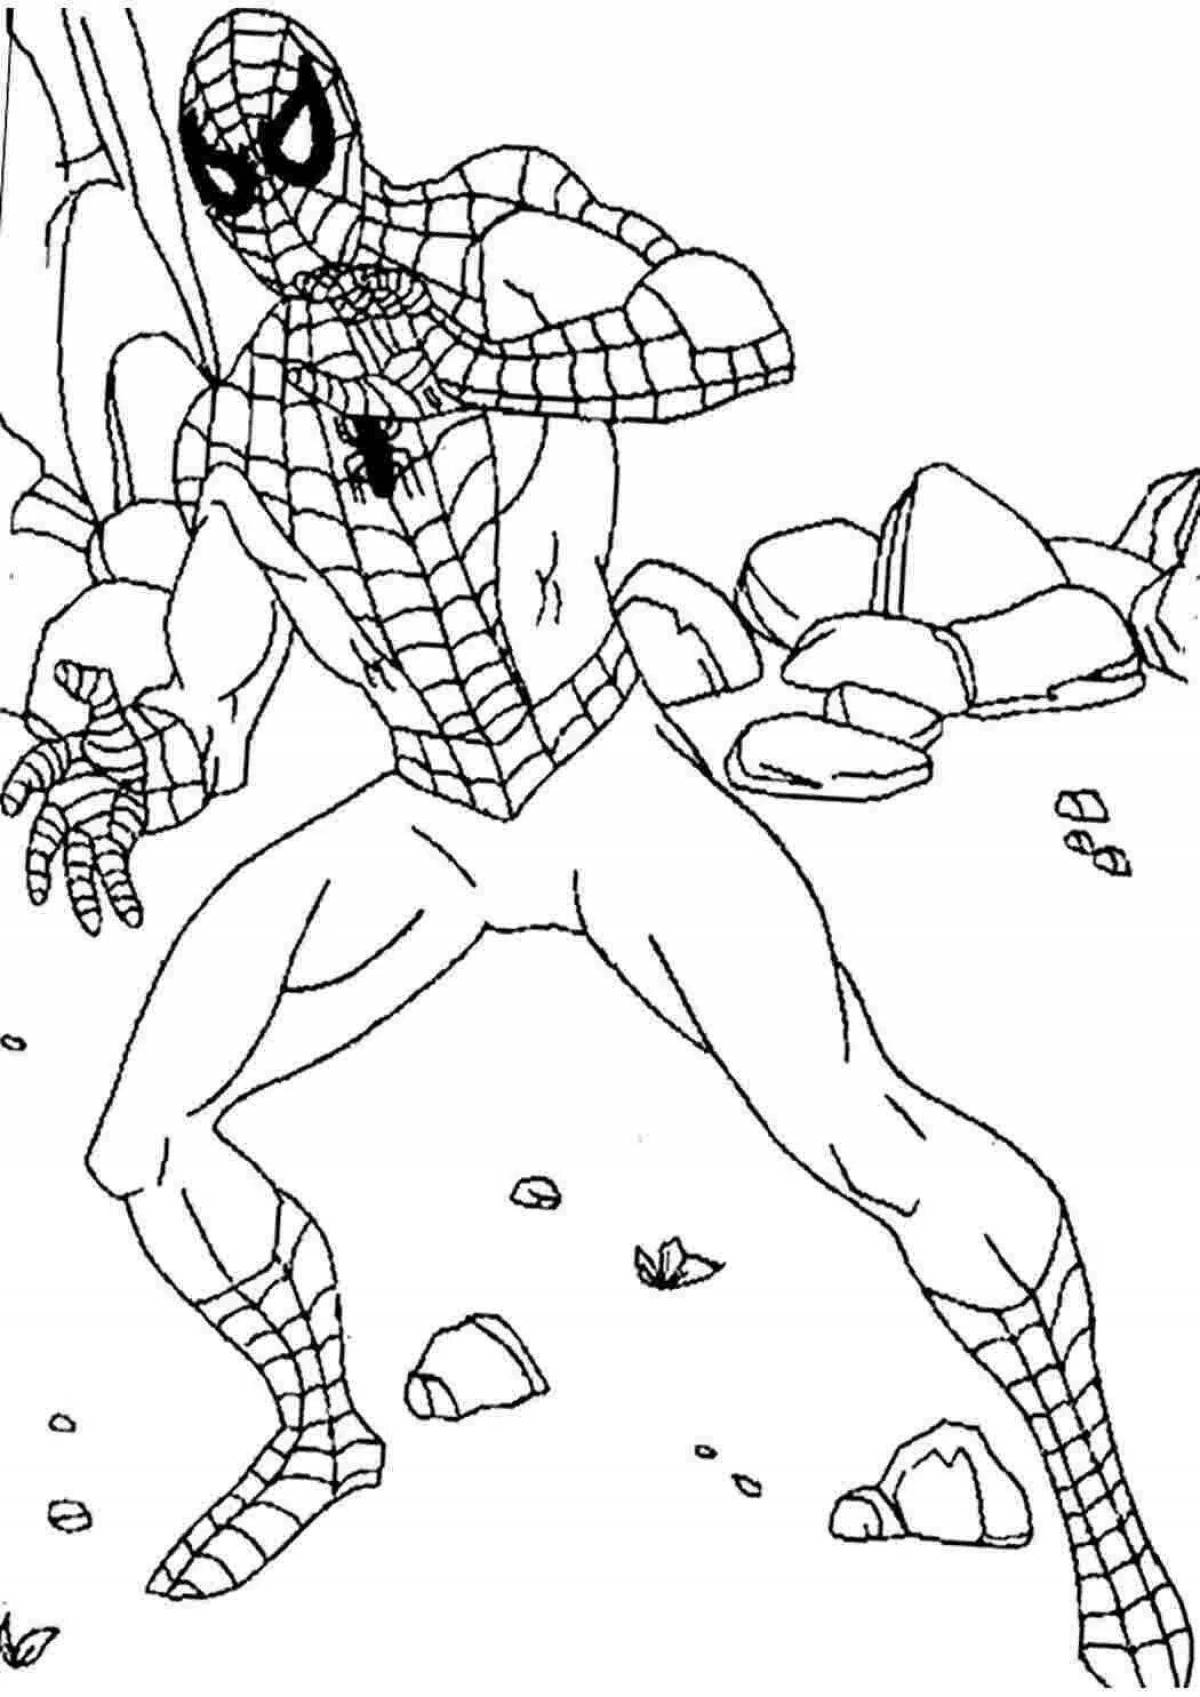 Adorable superheroes coloring pages for 5-6 year olds